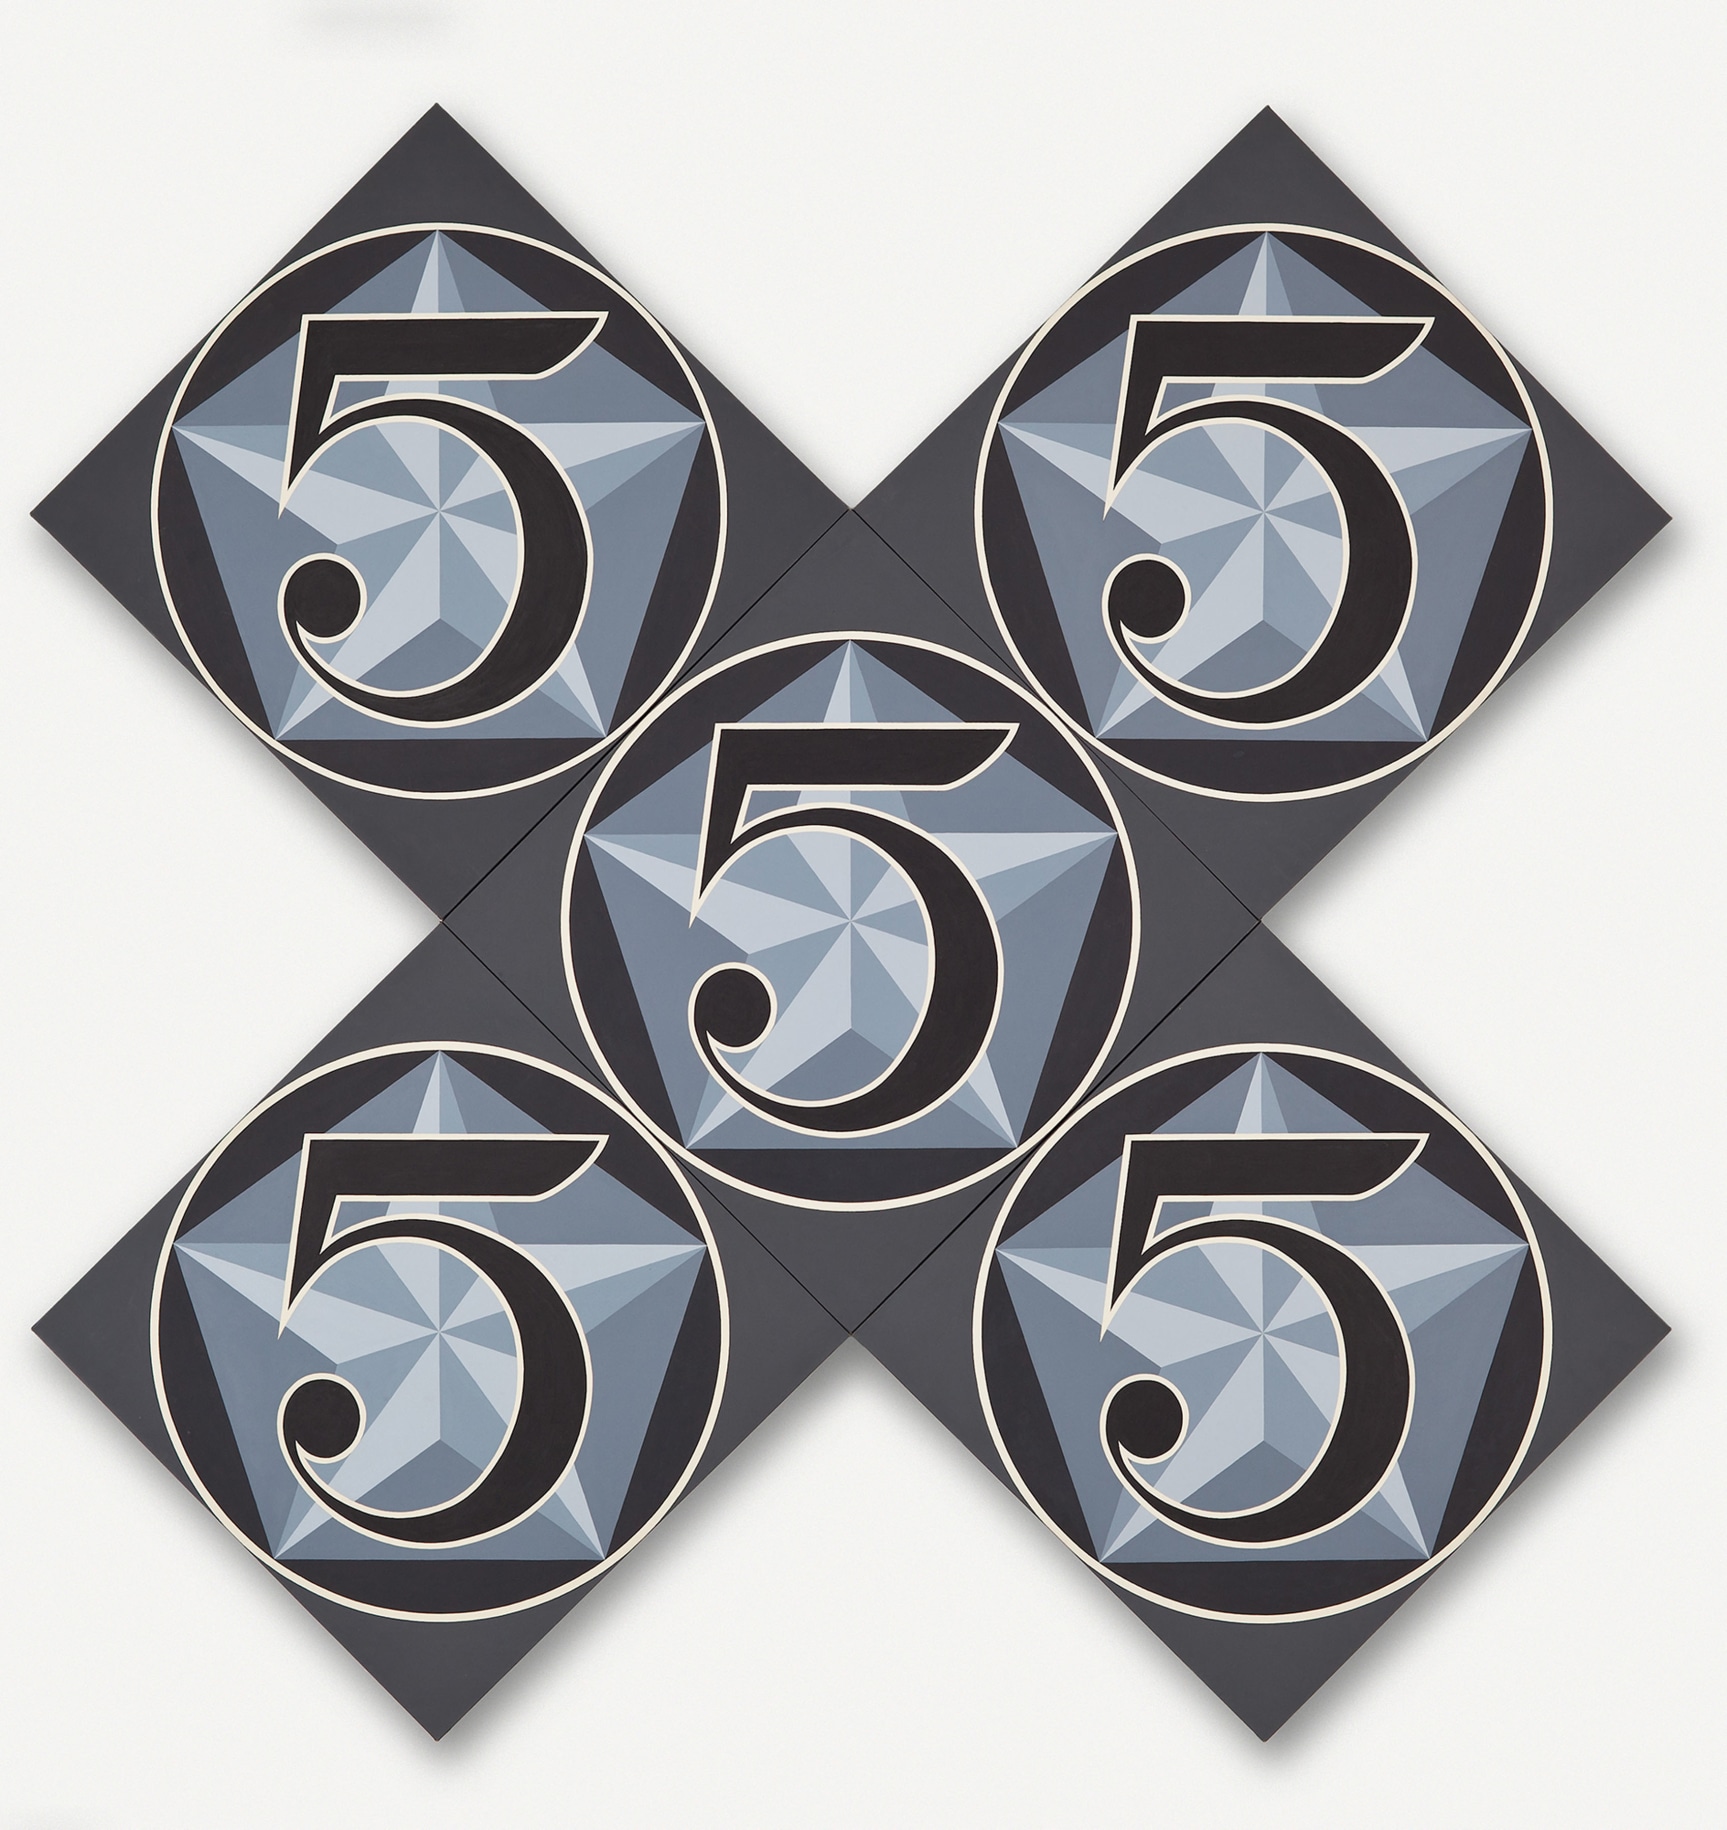 The X-5, an x-format painting made up of five diamond shaped panels, measuring 102 by 102 inches overall. Each panel consists of a black five against a star within a light gray pentagon within a black circle against a dark gray ground.